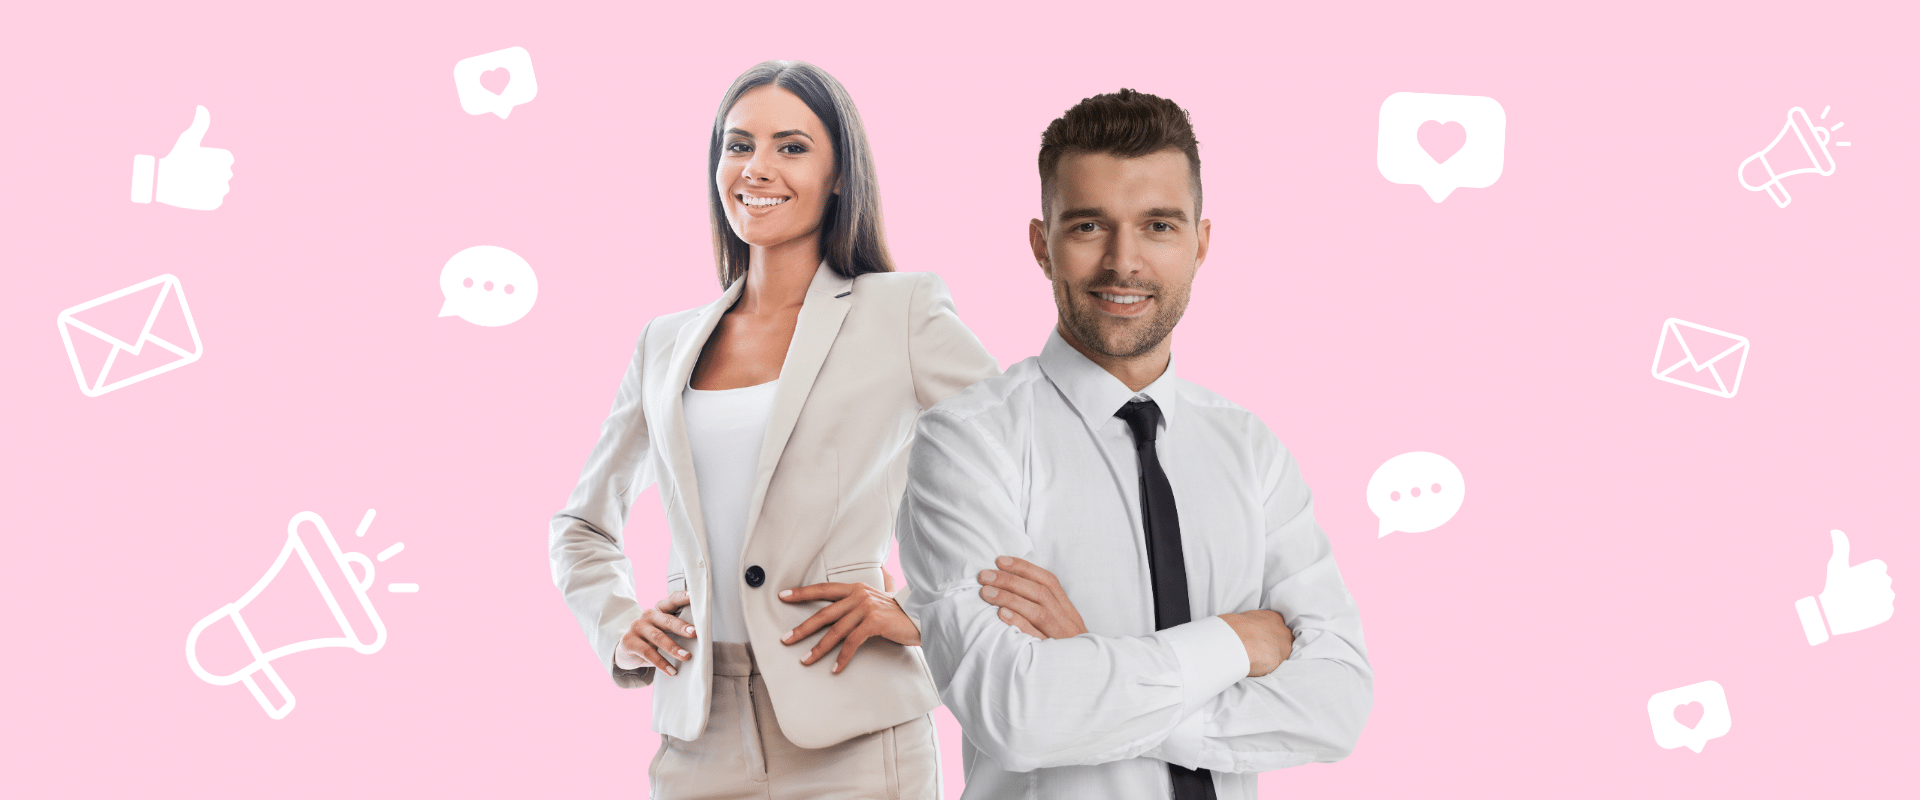 A man and woman standing in front of a pink background with social media icons.